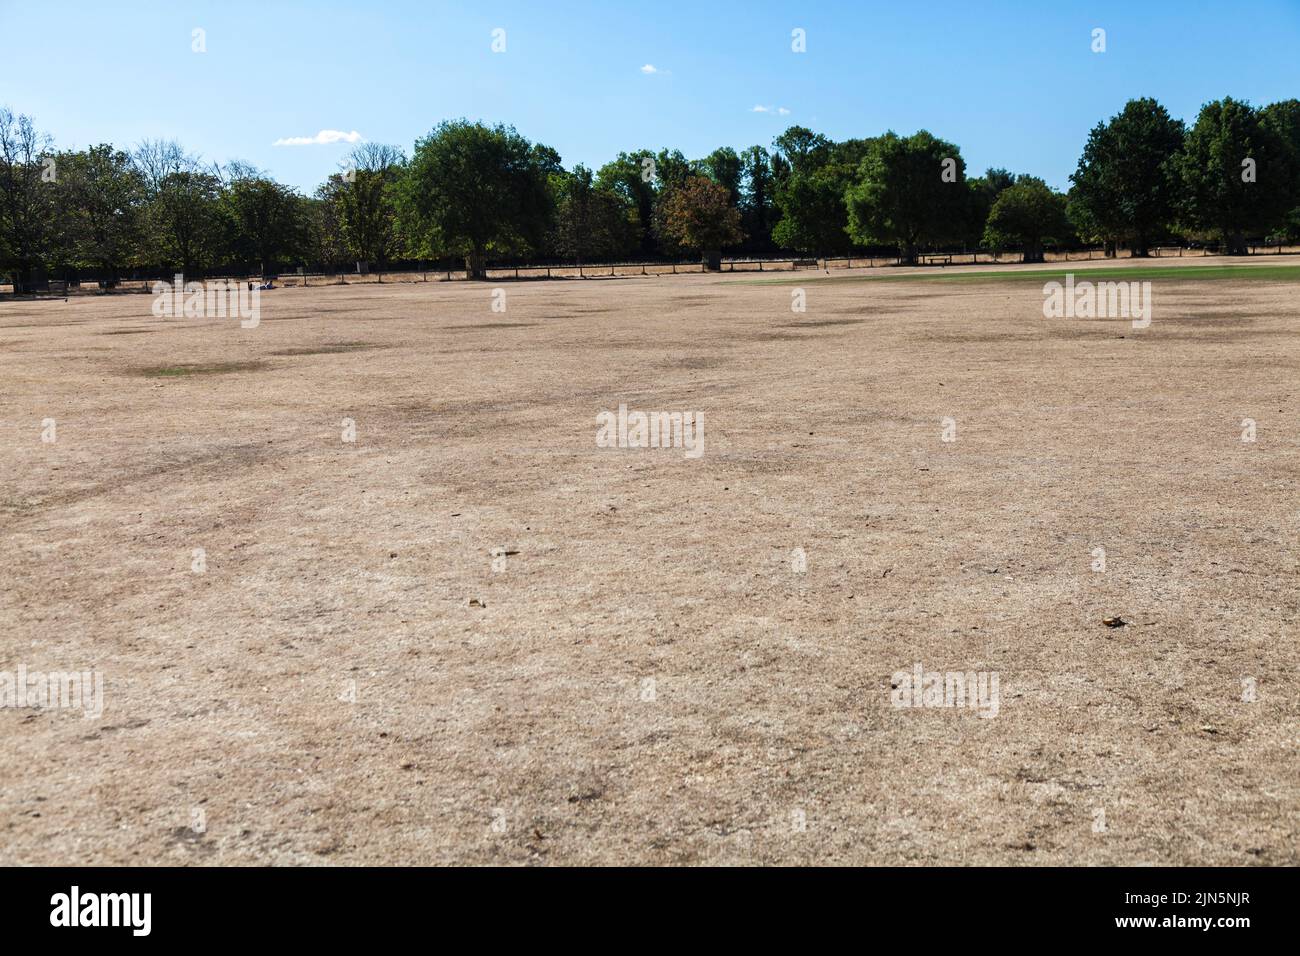 Bushy Park,Richmond upon Thames,UK. 5th August 2022. Scorched grasslands in the park, with another heatwave imminent. David Dixon / Alamy Stock Photo